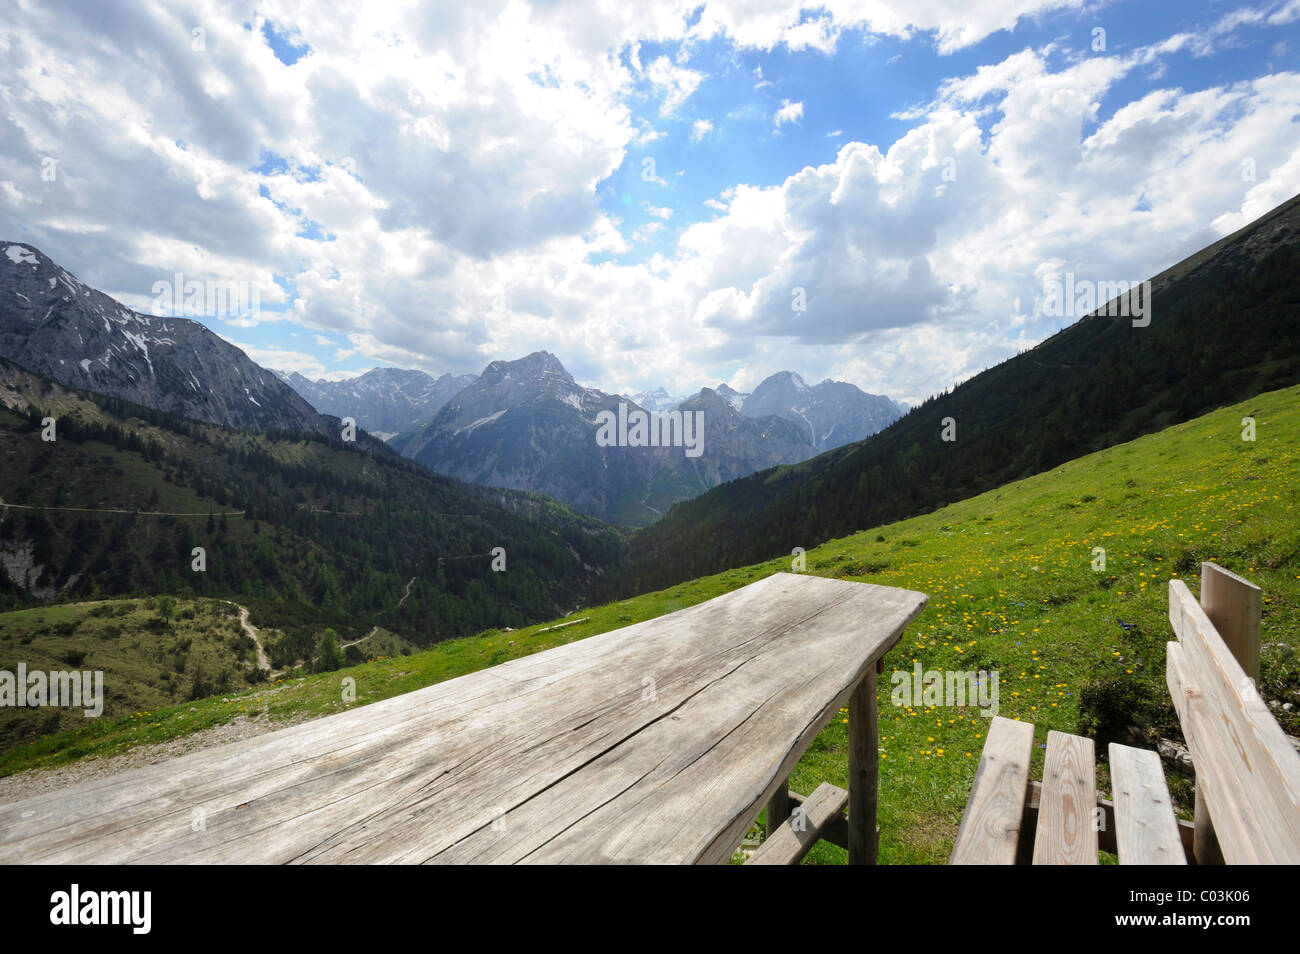 View from the picnic area at Plumsjochhuette hut in the Karwendel Mountains, Tyrol, Austria, Europe Stock Photo